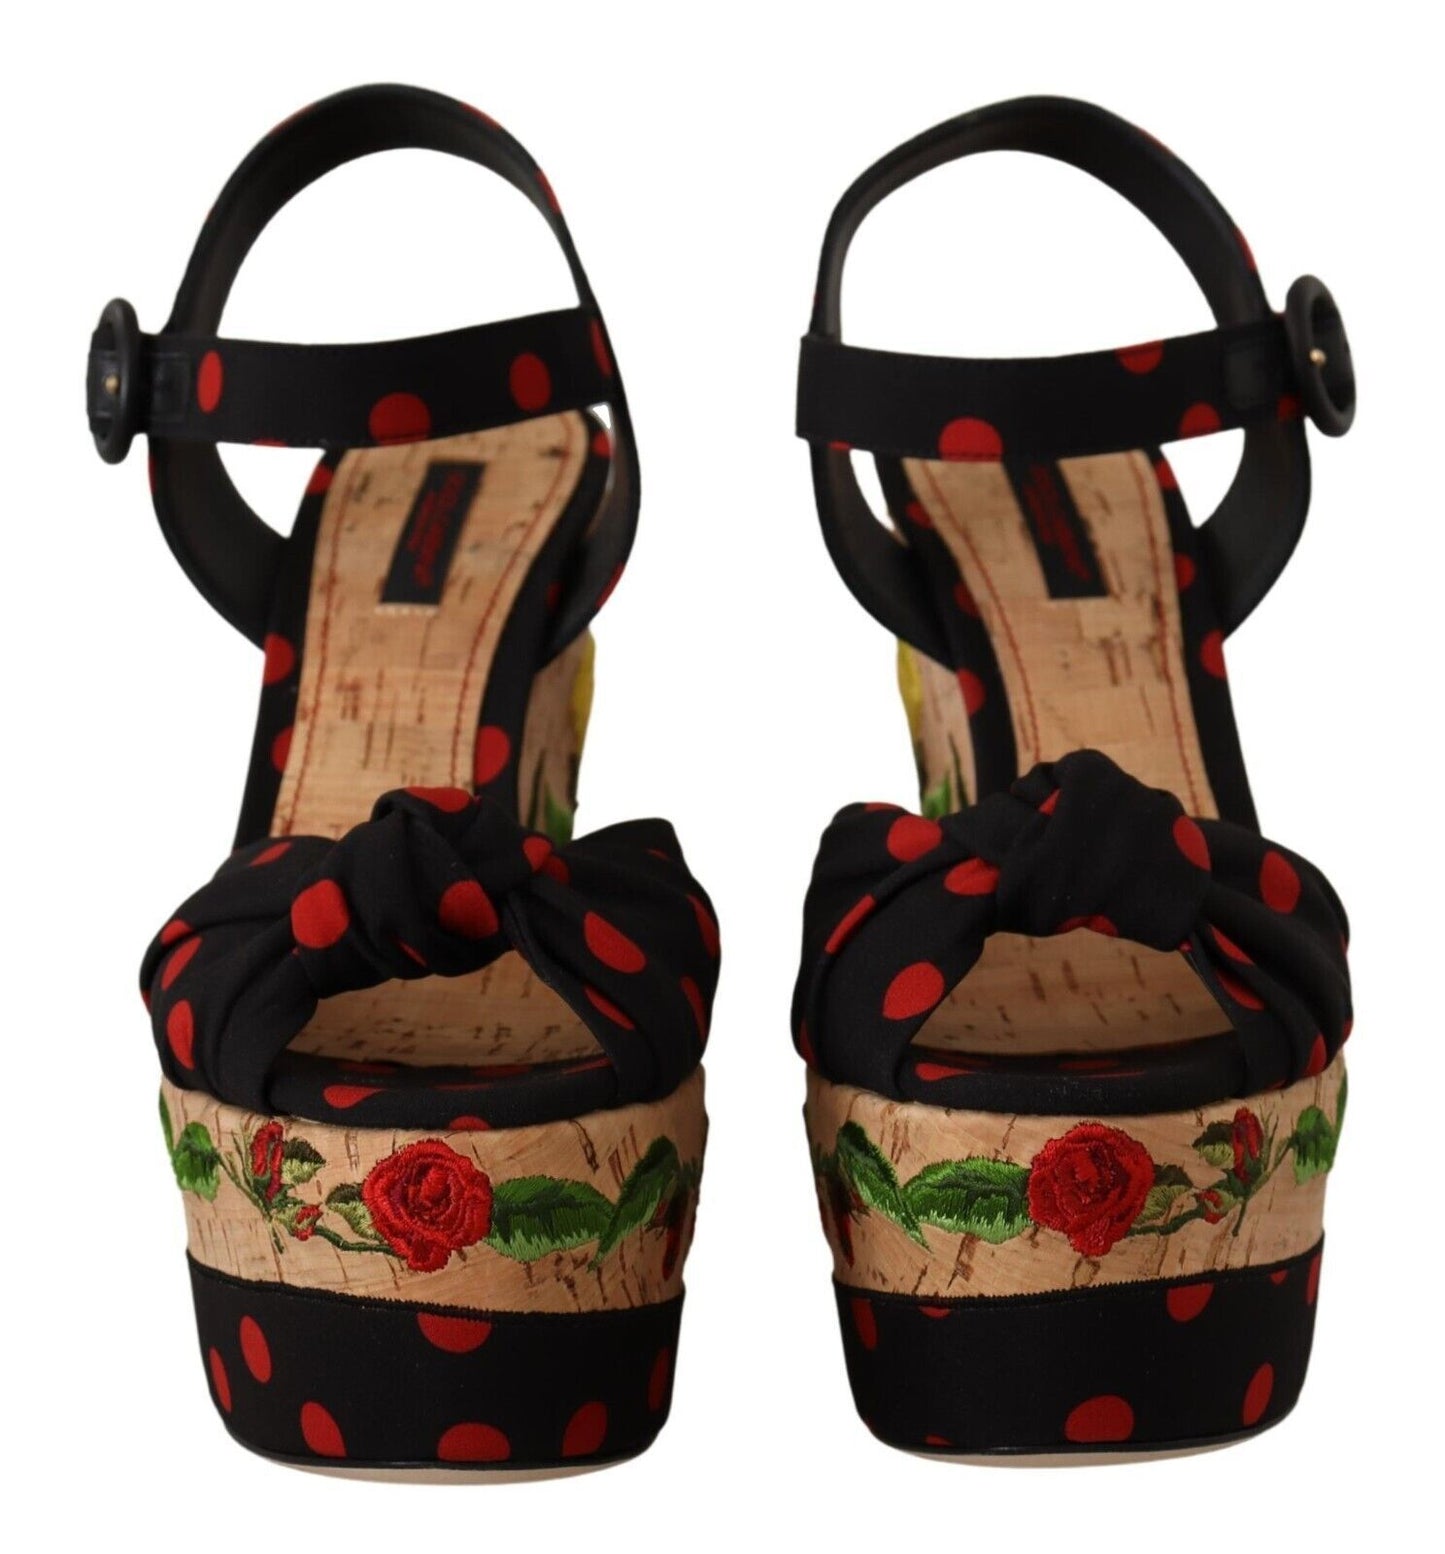 Dolce & Gabbana Plateforme multicolore coins sandales Chaussures charmeuse